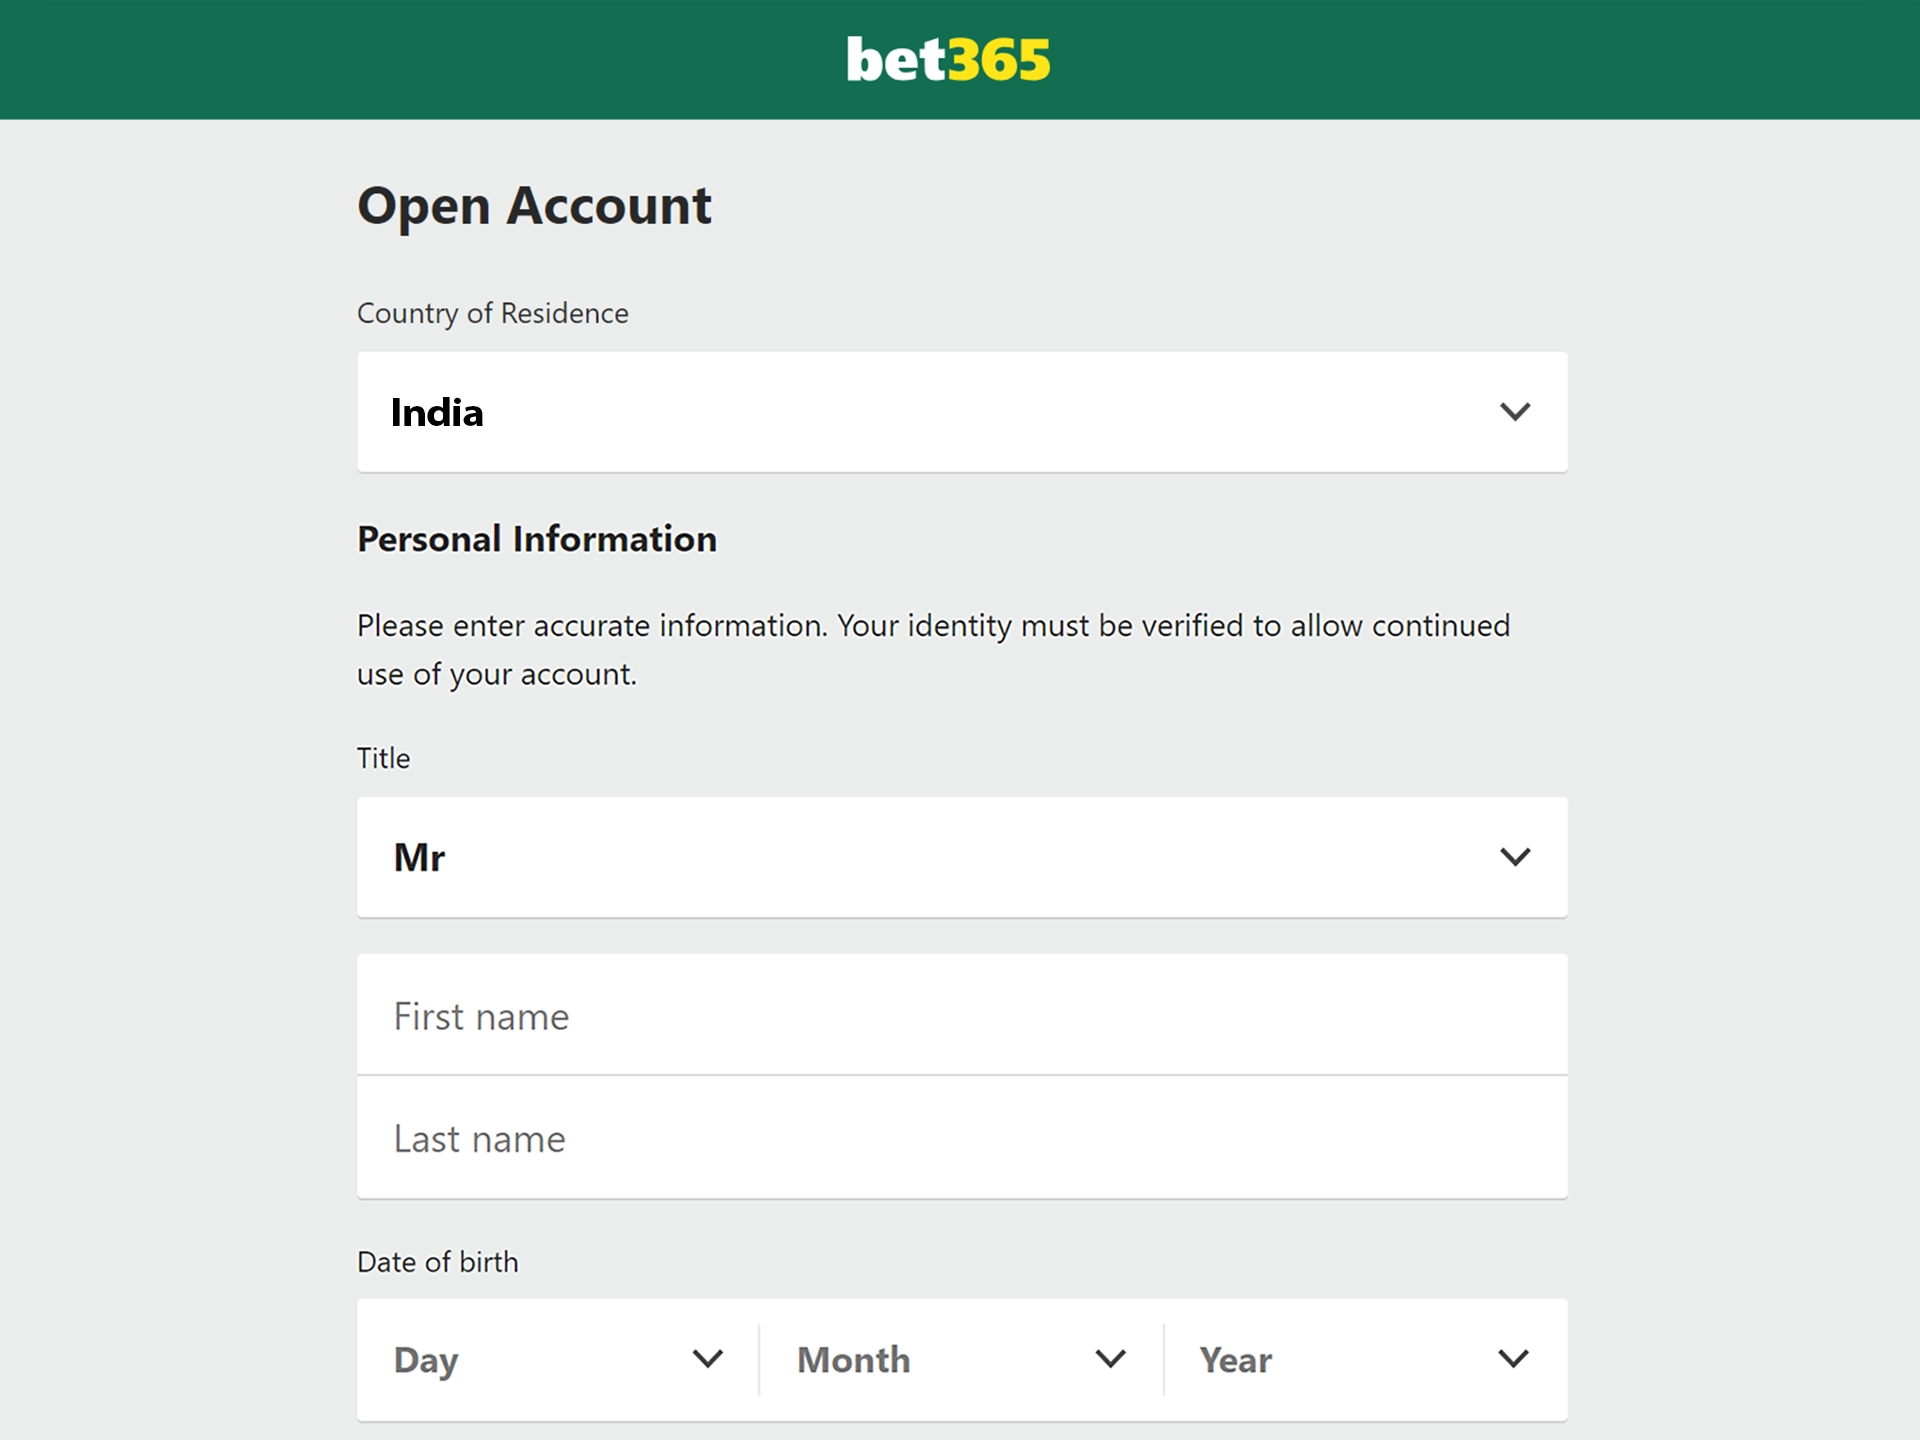 Start entering the details required to register at Bet365.